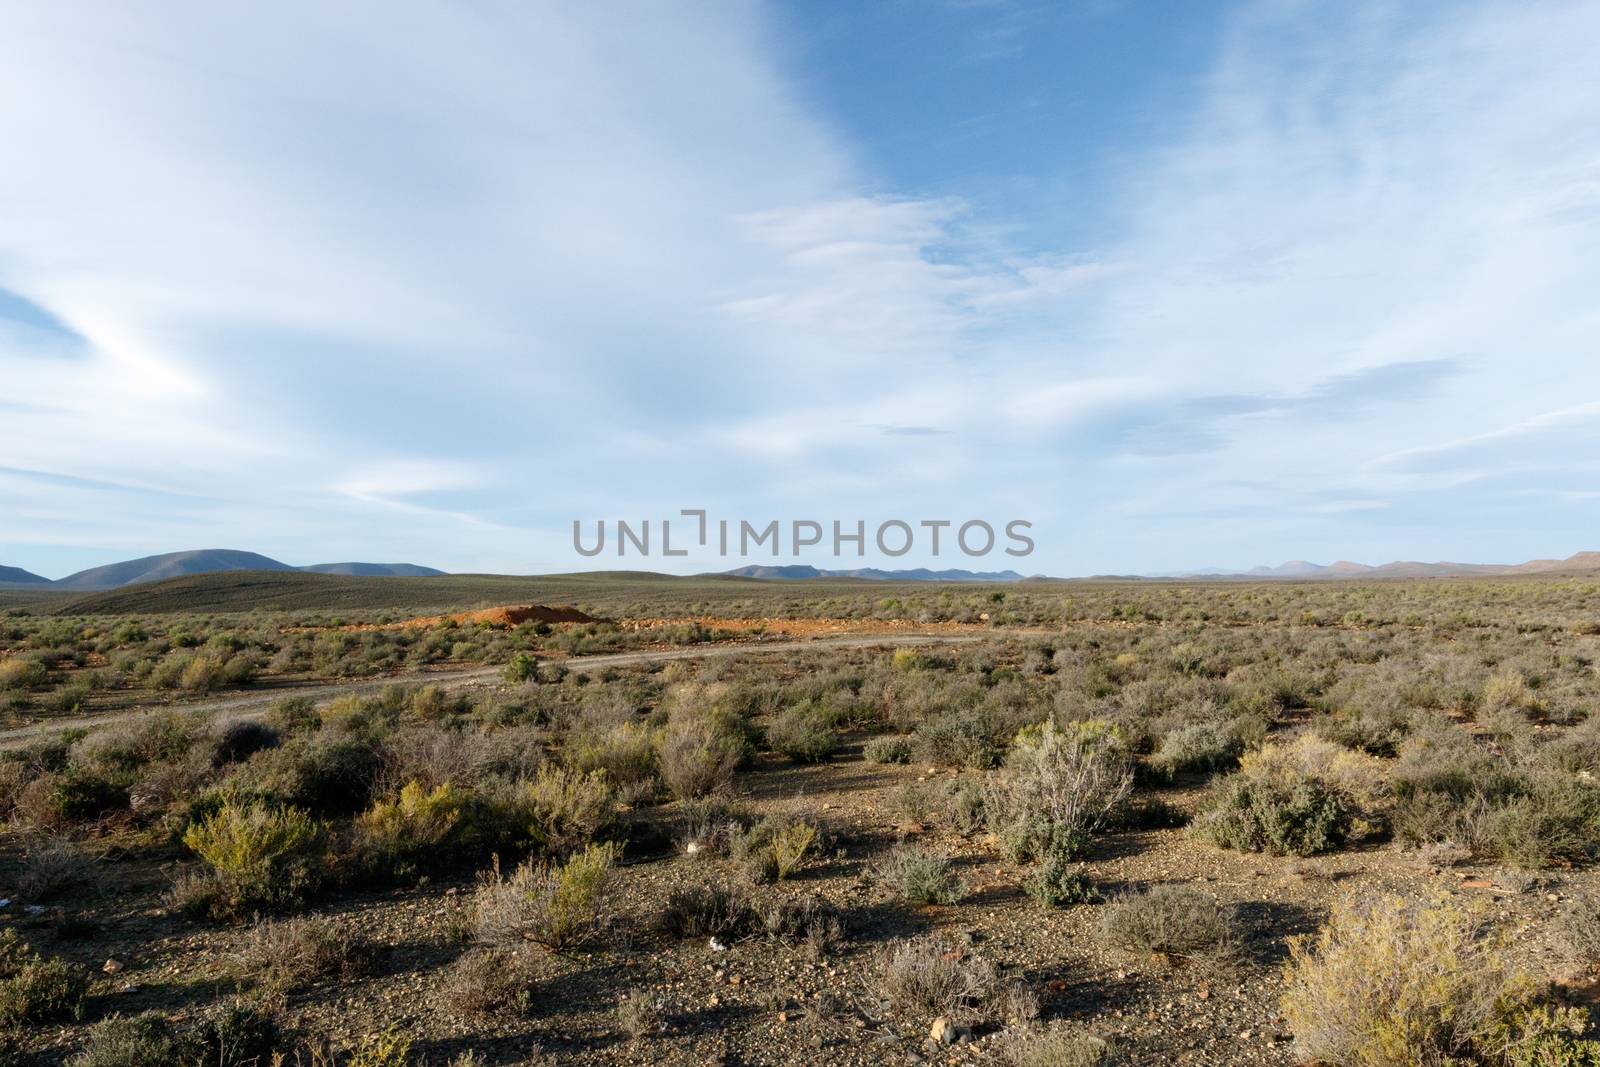 Just WoW  - Yellow in a field of nothing - Sutherland is a town with about 2,841 inhabitants in the Northern Cape province of South Africa. It lies in the western Roggeveld Mountains in the Karoo